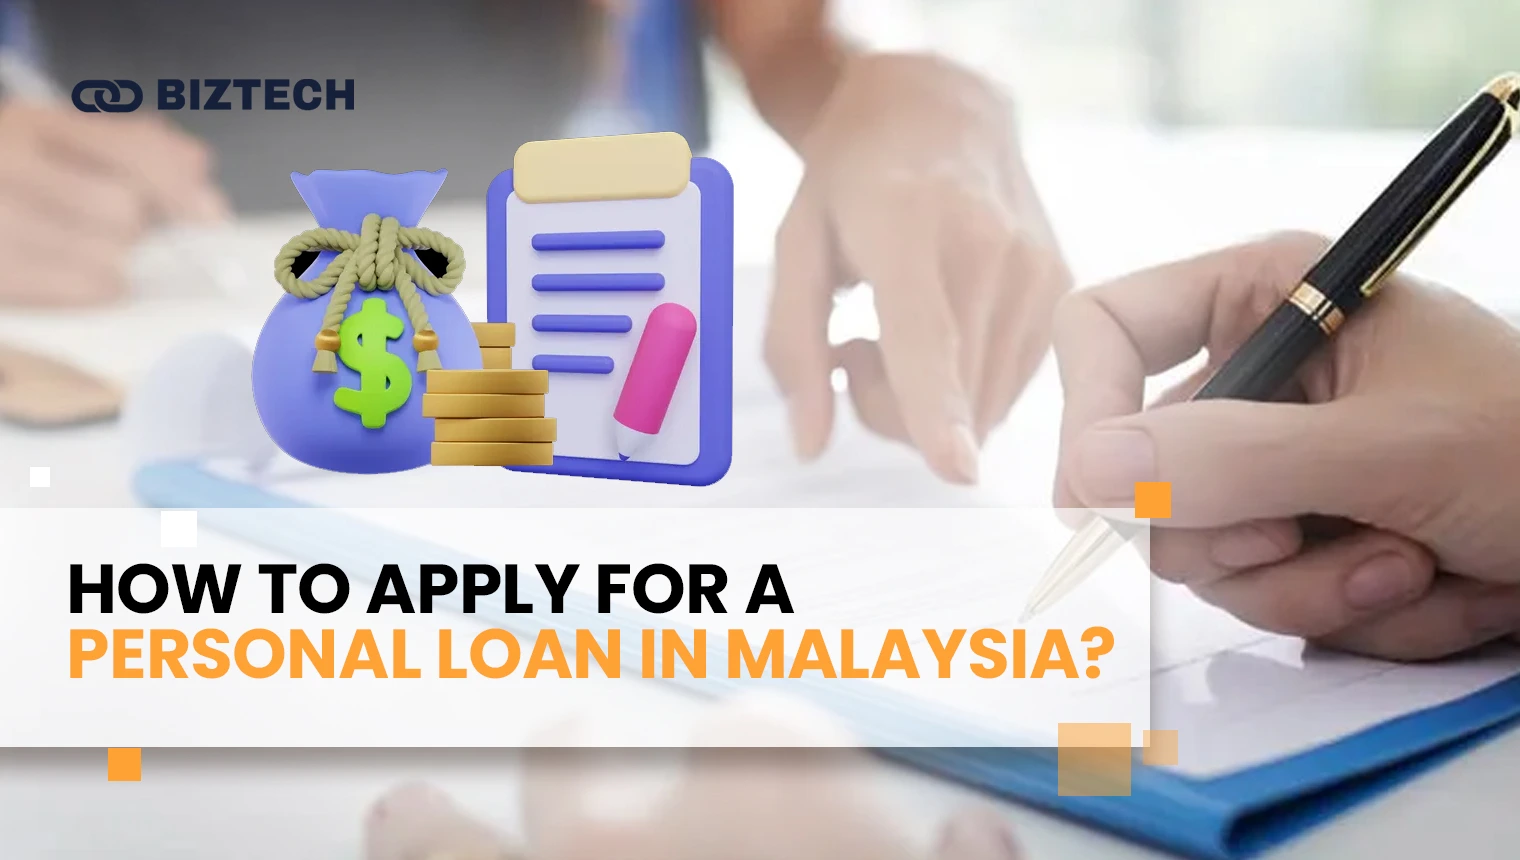 How to Apply for a Personal Loan in Malaysia